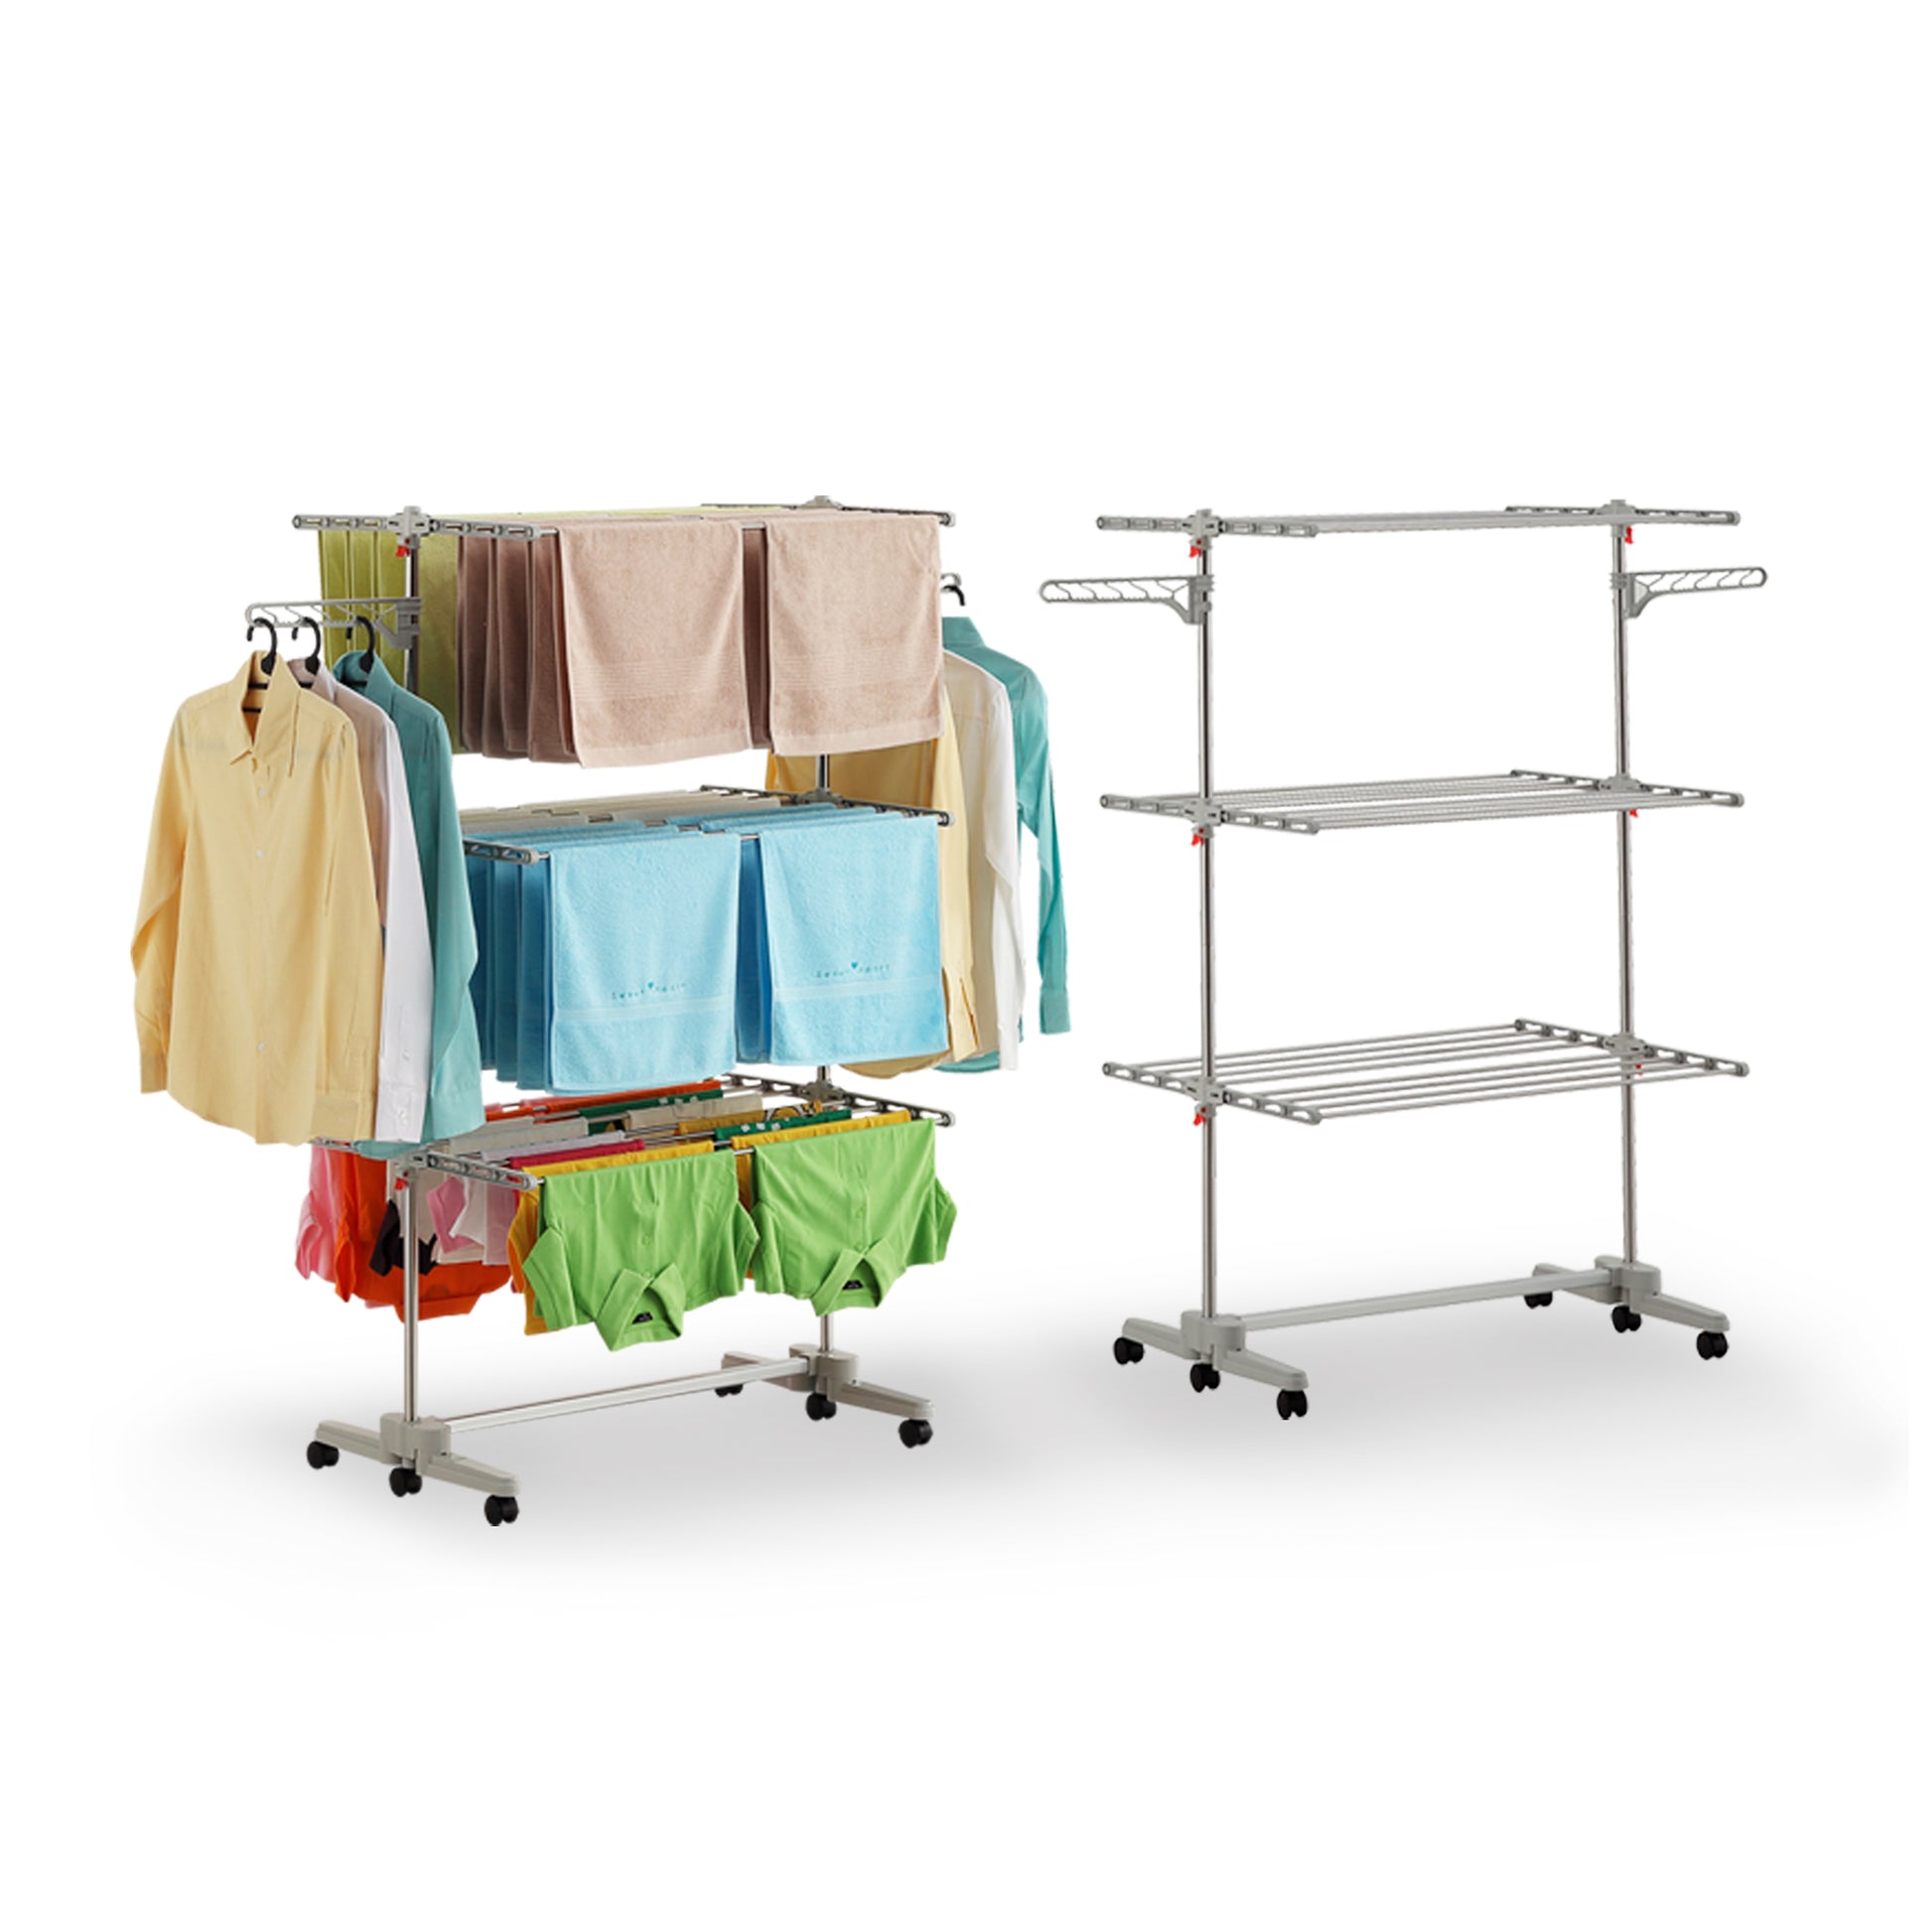 Hyfive Clothes Drying Rack 3 Tier Airer Portable